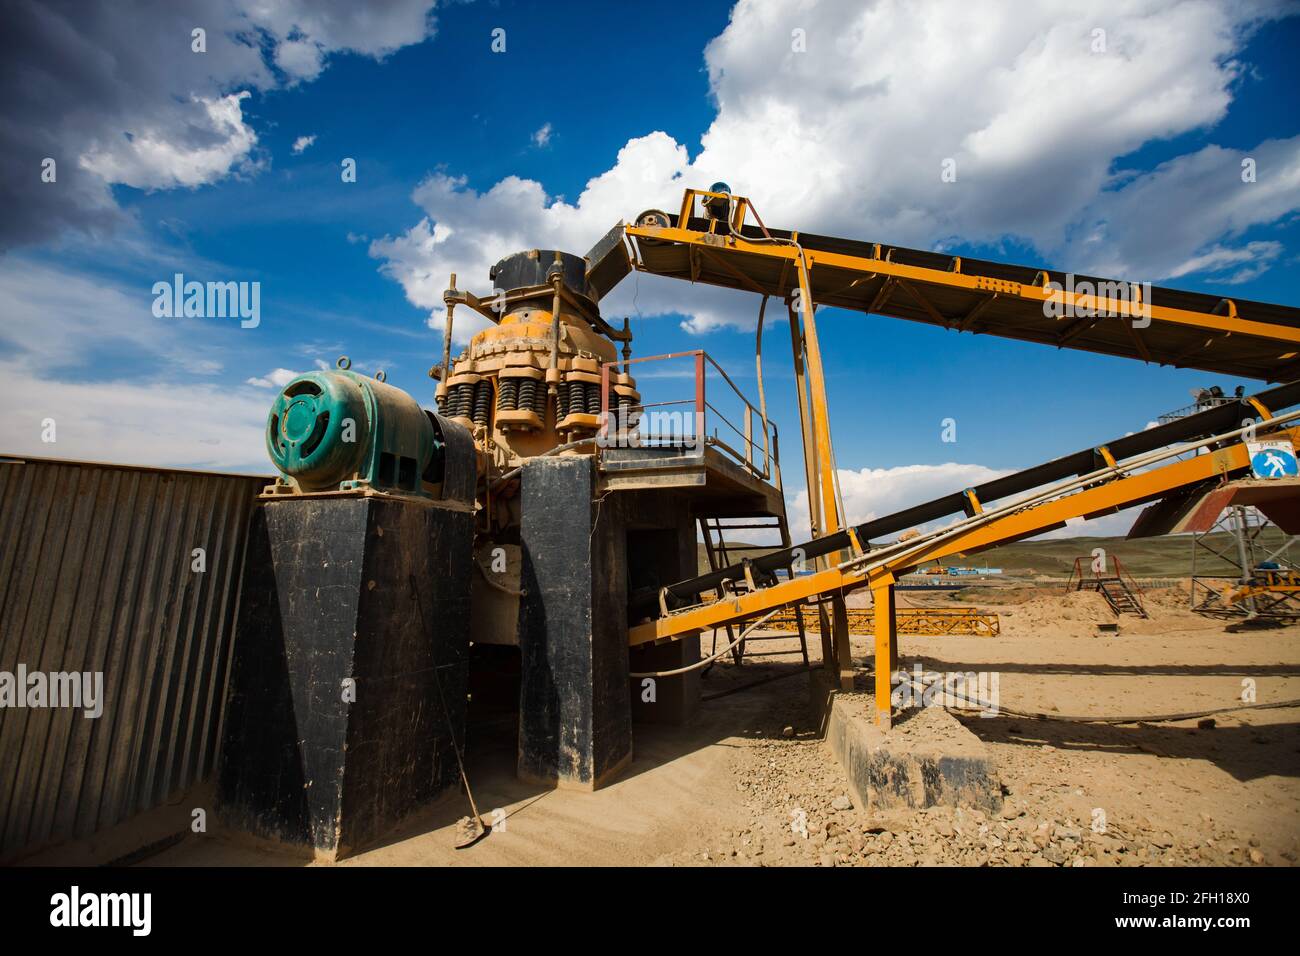 Rock crushing plant. Gravel separation machine. Construction materials production. Yellow conveyor belts and cone crusher. Green electric motor. Stock Photo